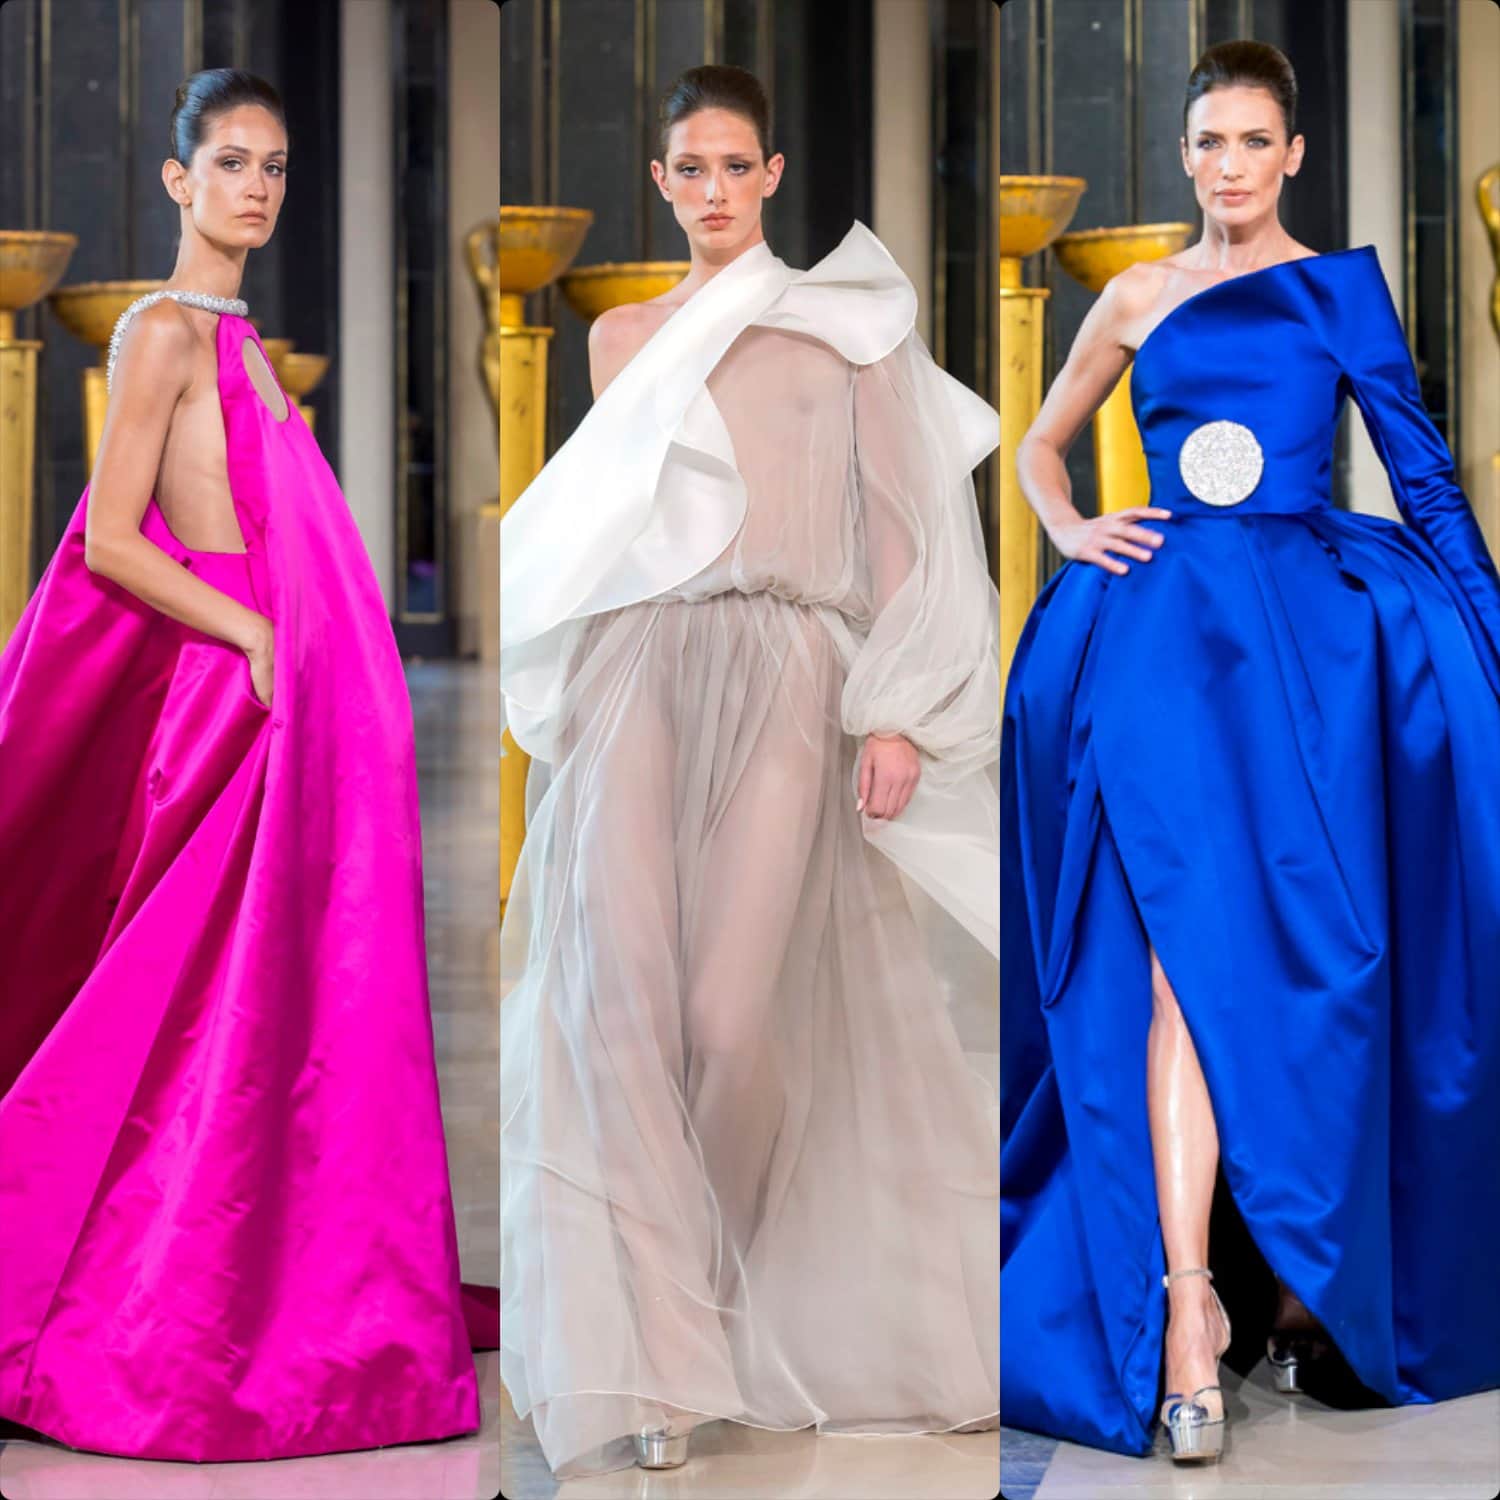 Stephane Rolland Haute Couture Spring Summer 2020 Paris Fashion Week. RUNWAY MAGAZINE ® Collections. RUNWAY NOW / RUNWAY NEW